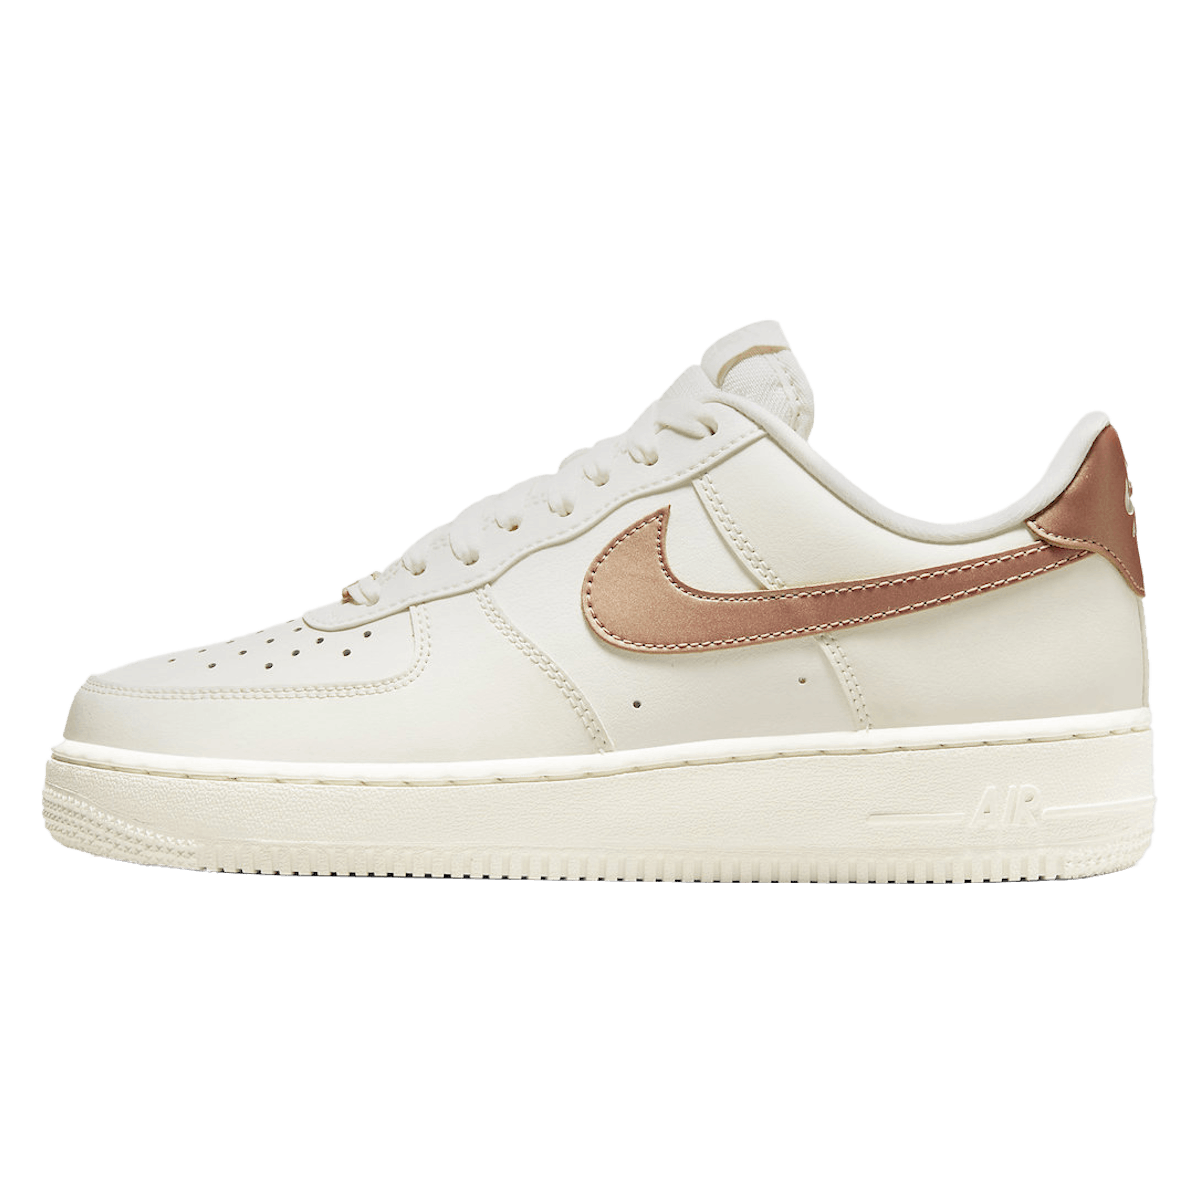 Nike Air Force 1 Low WMNS "Metallic Red Bronze"